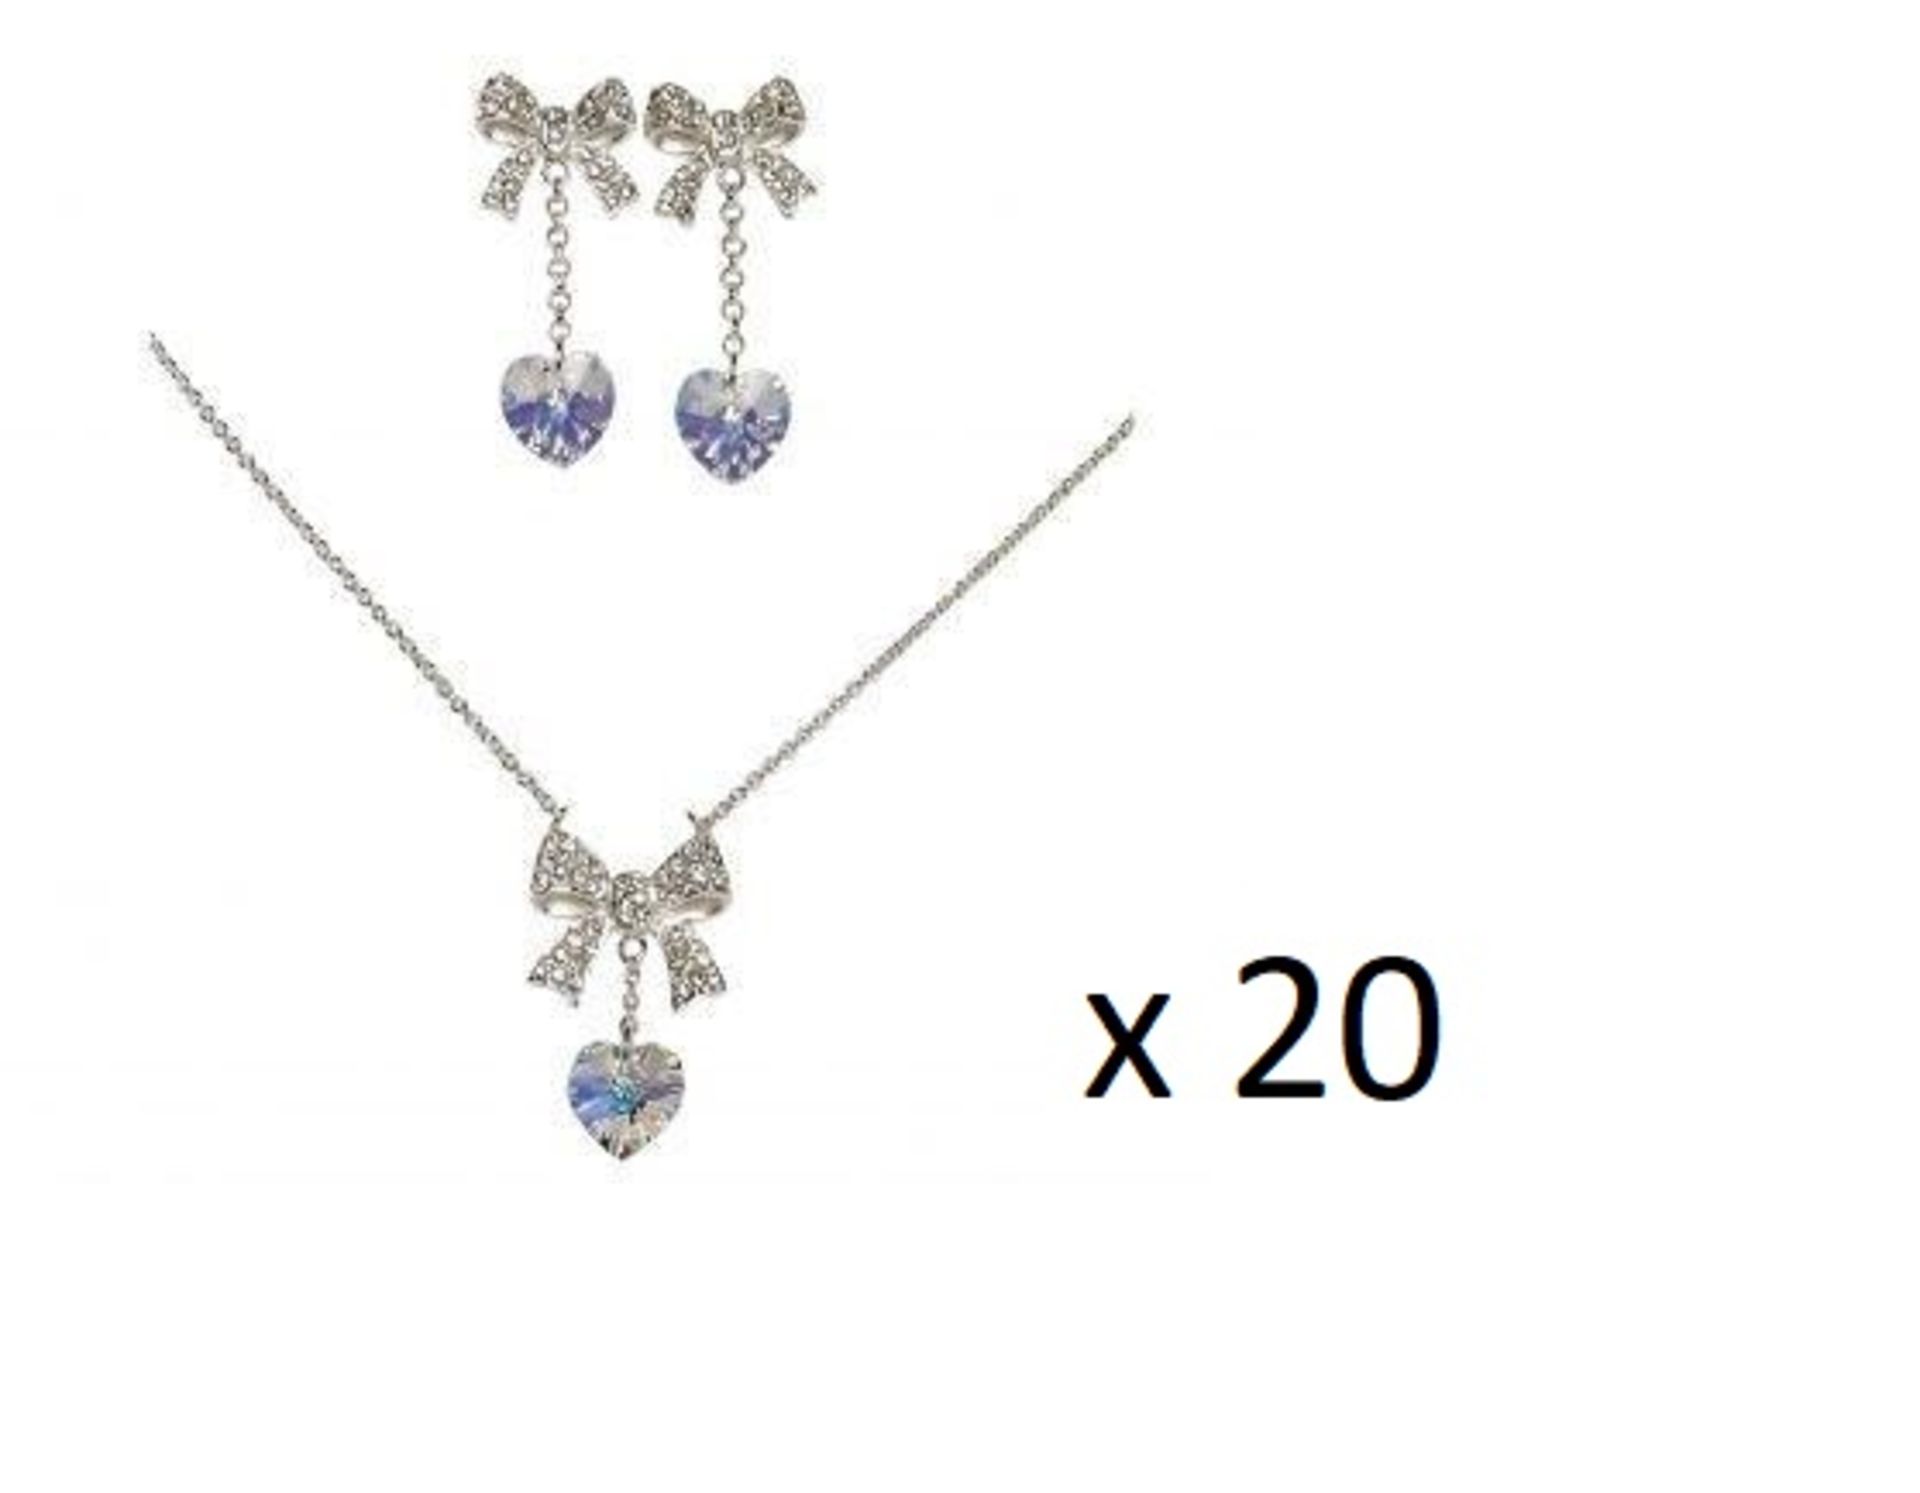 20 x HEART PENDANT AND EARRING SETS By ICE London - EGJ-9900 - Silver-tone Curb Chain Adorned With